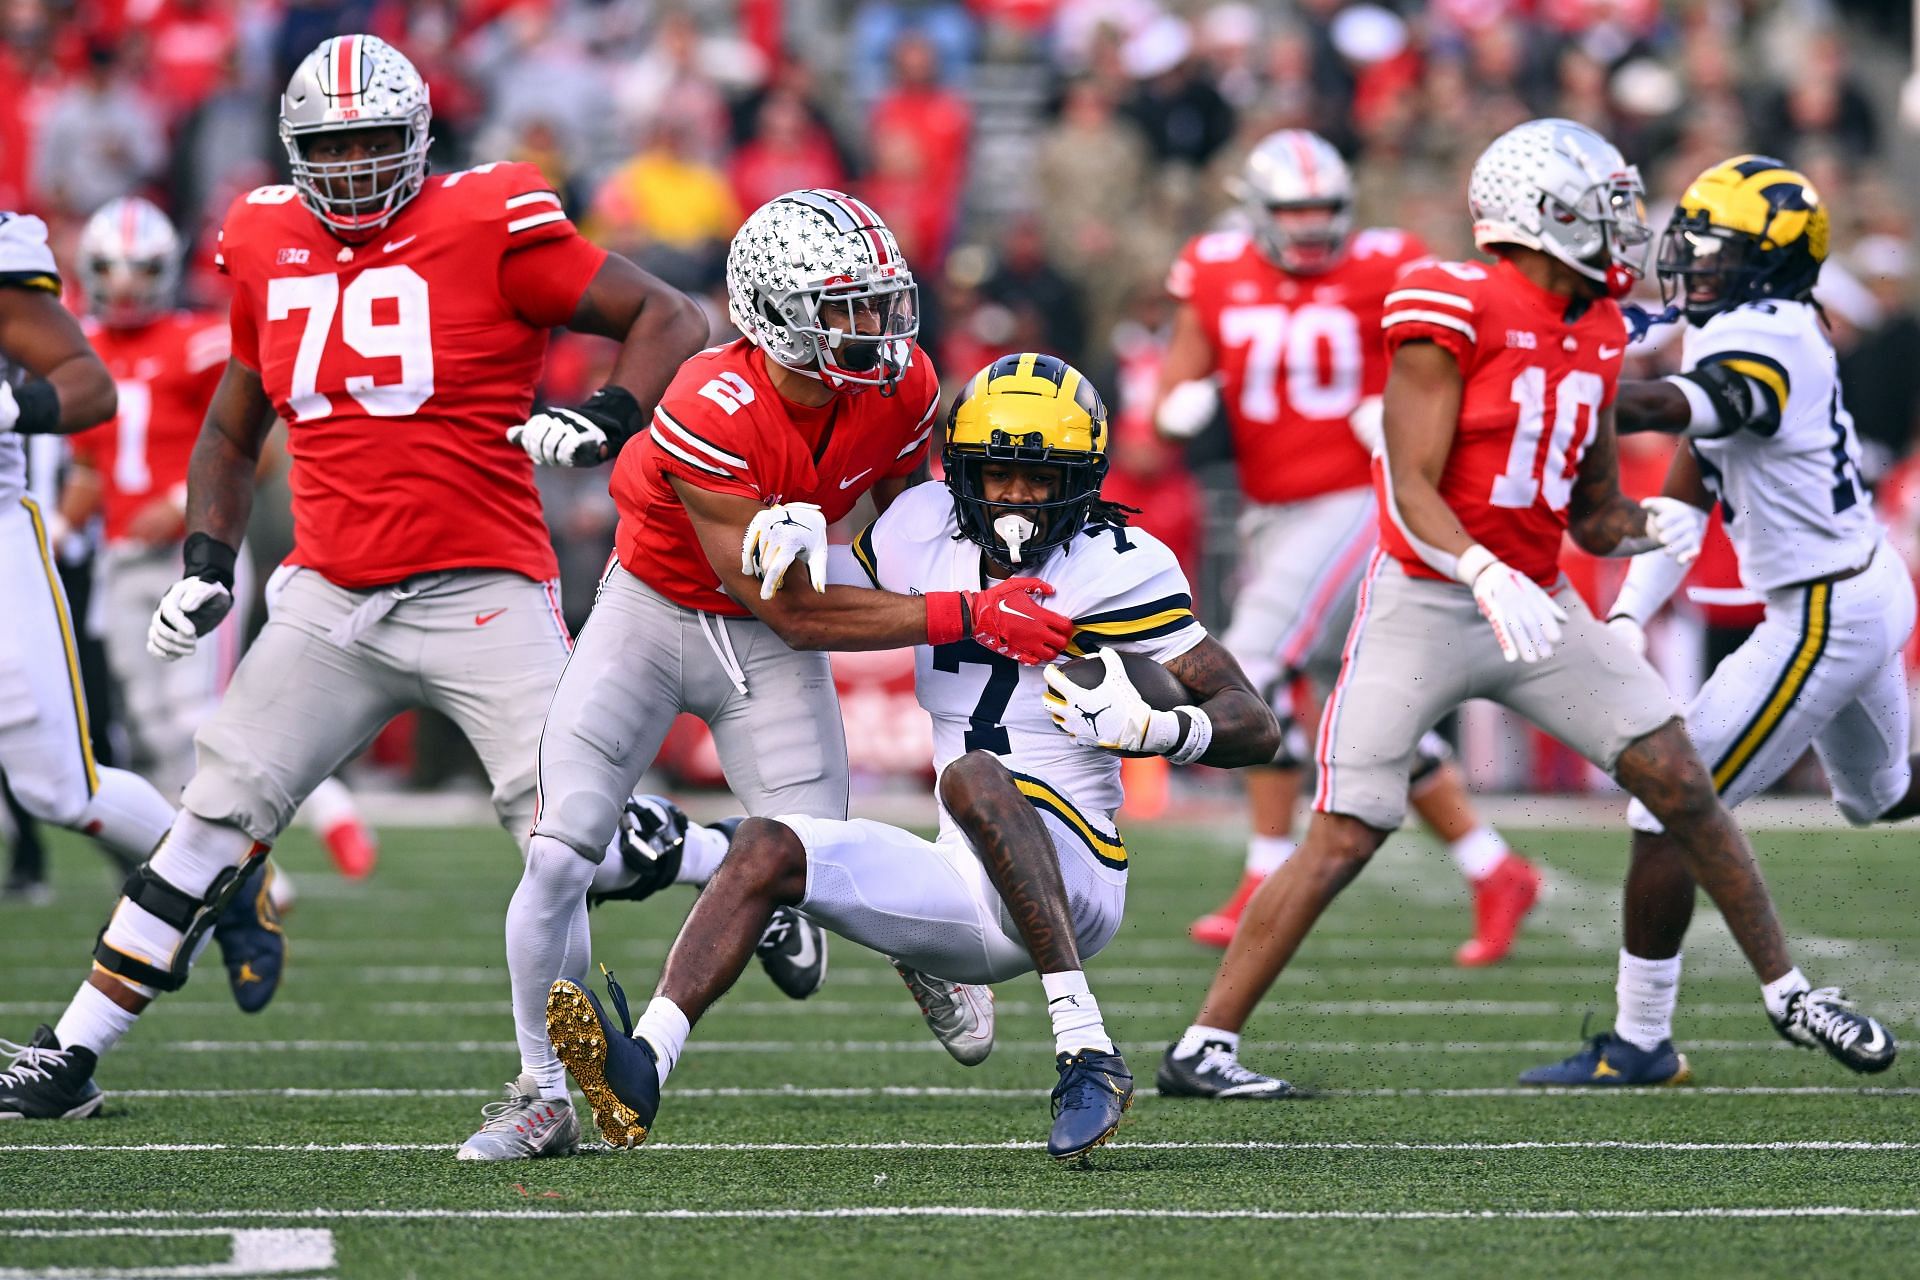 Michigan and Ohio State are two of the top teams in the Big Ten.